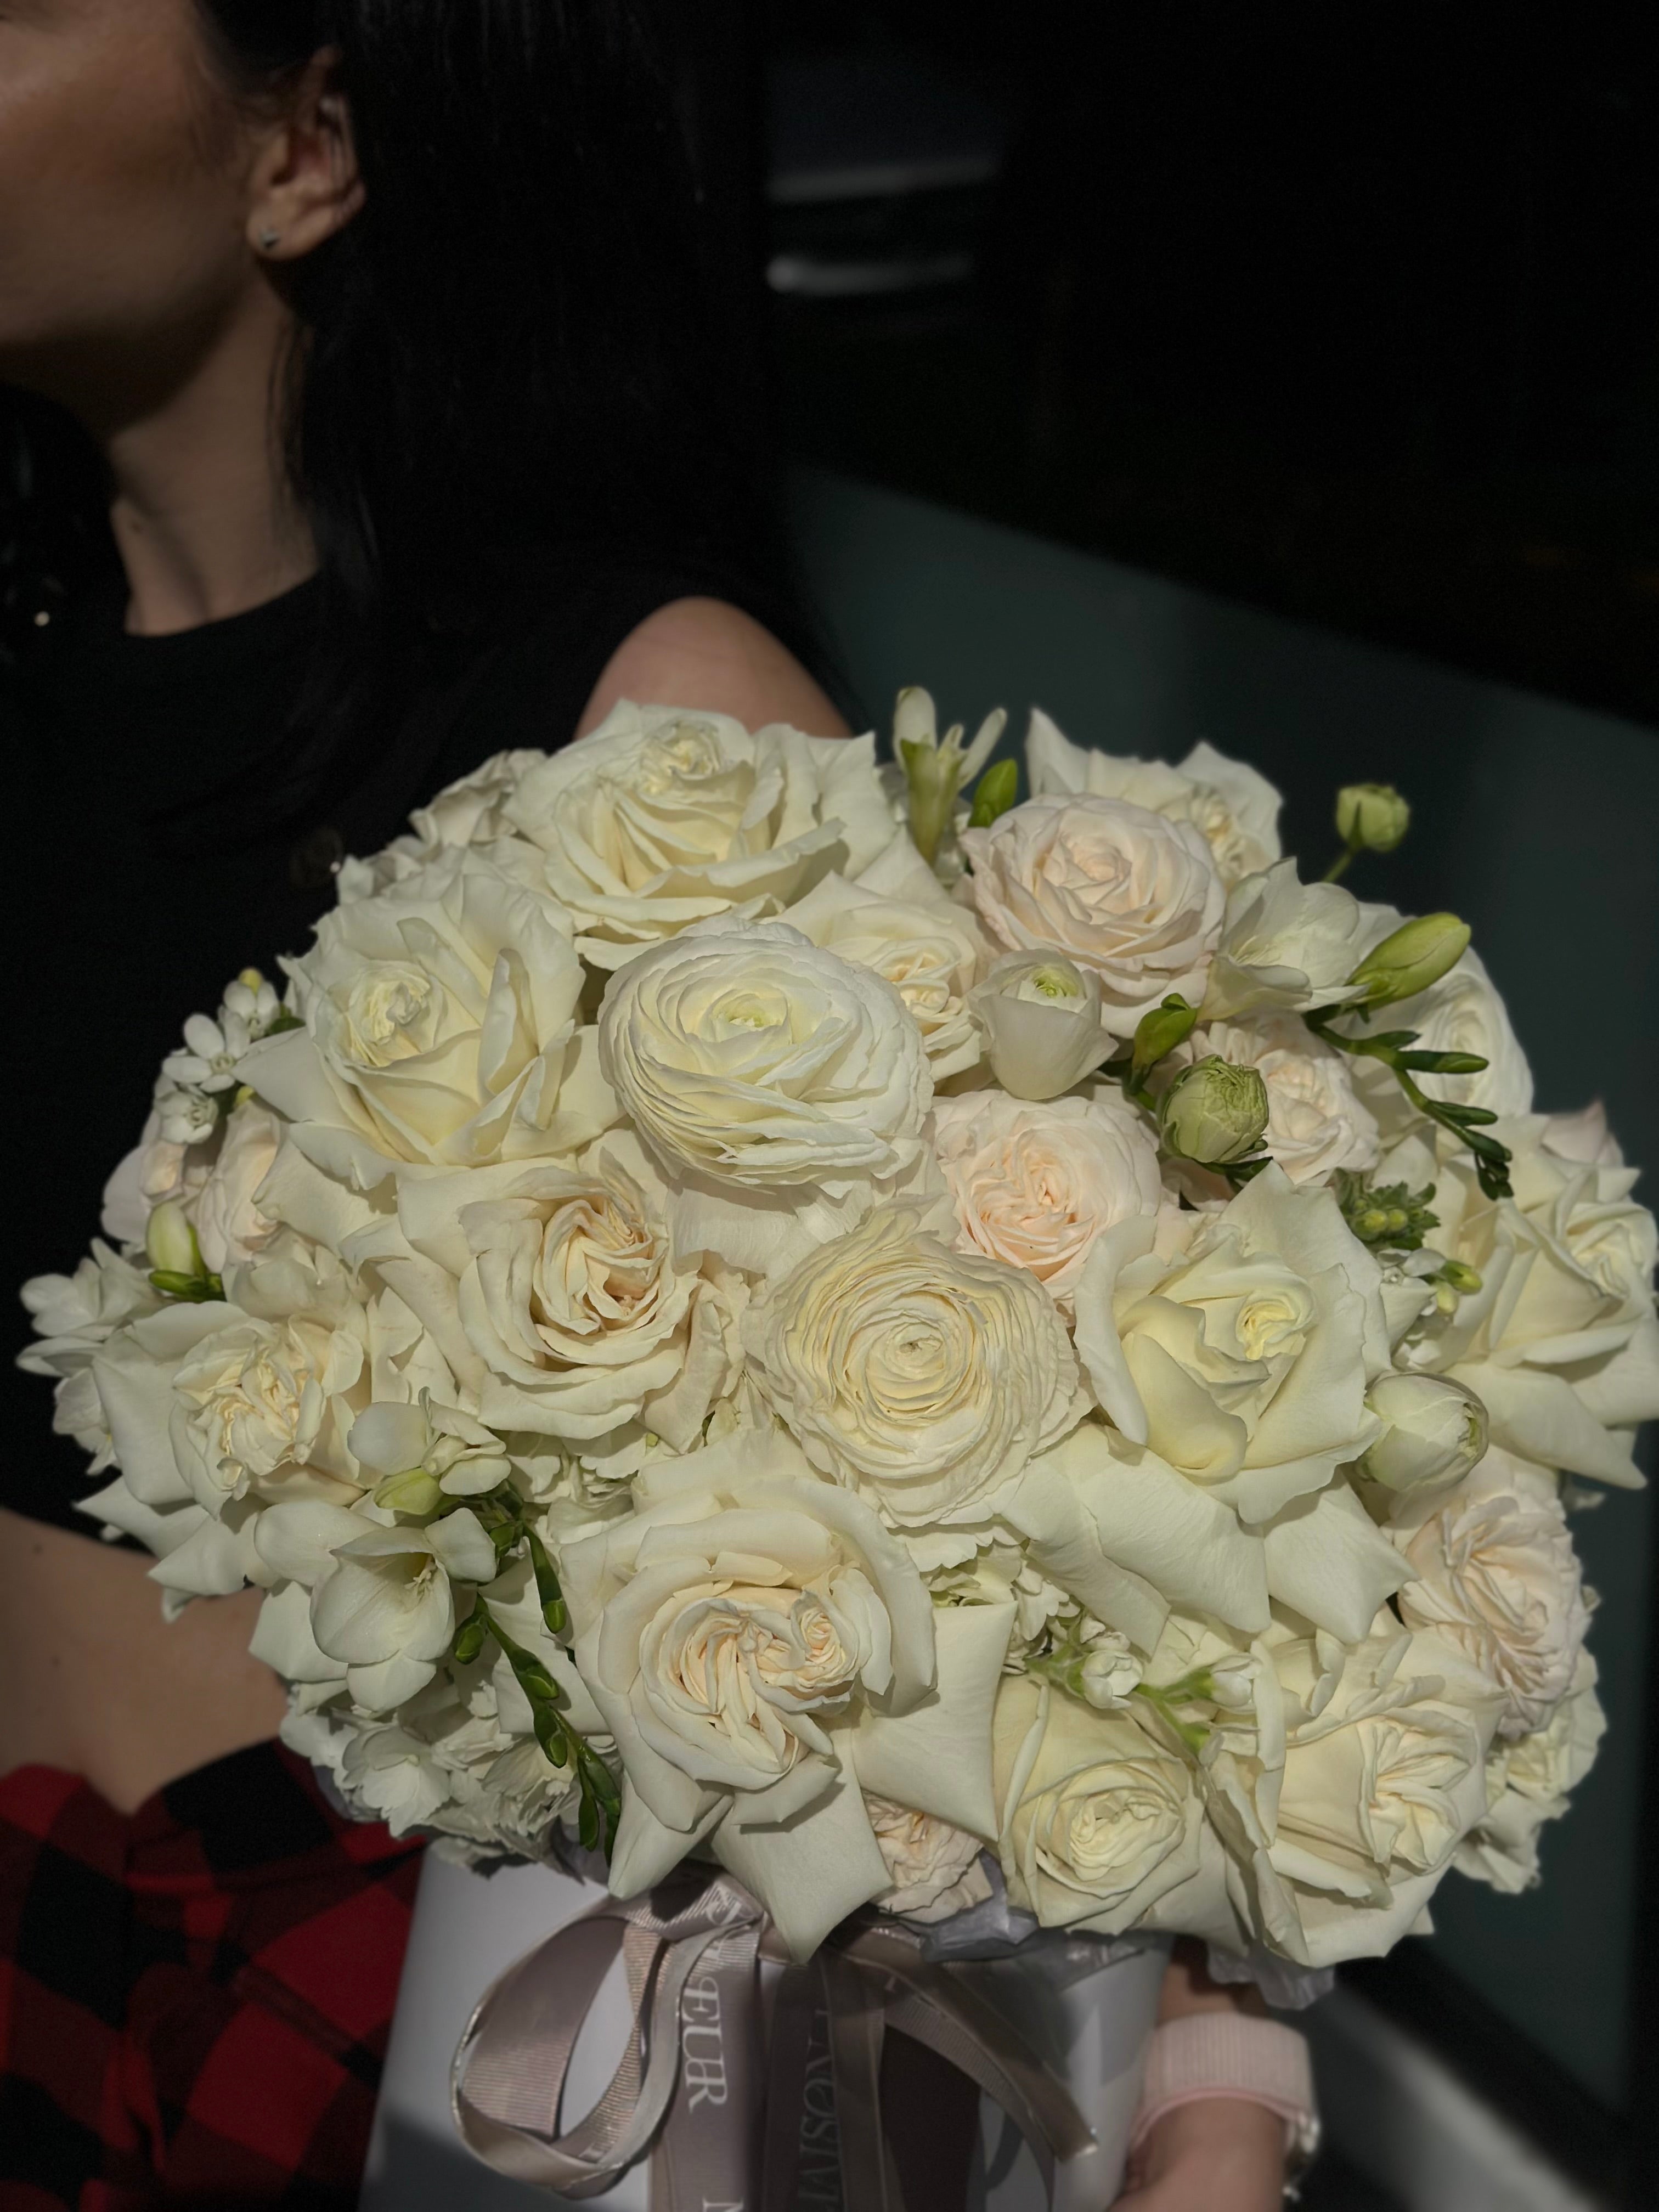 White Butterfly - Beautiful arrangement in a box with premium long stem white roses, hydrangea, ranunculus and freesia